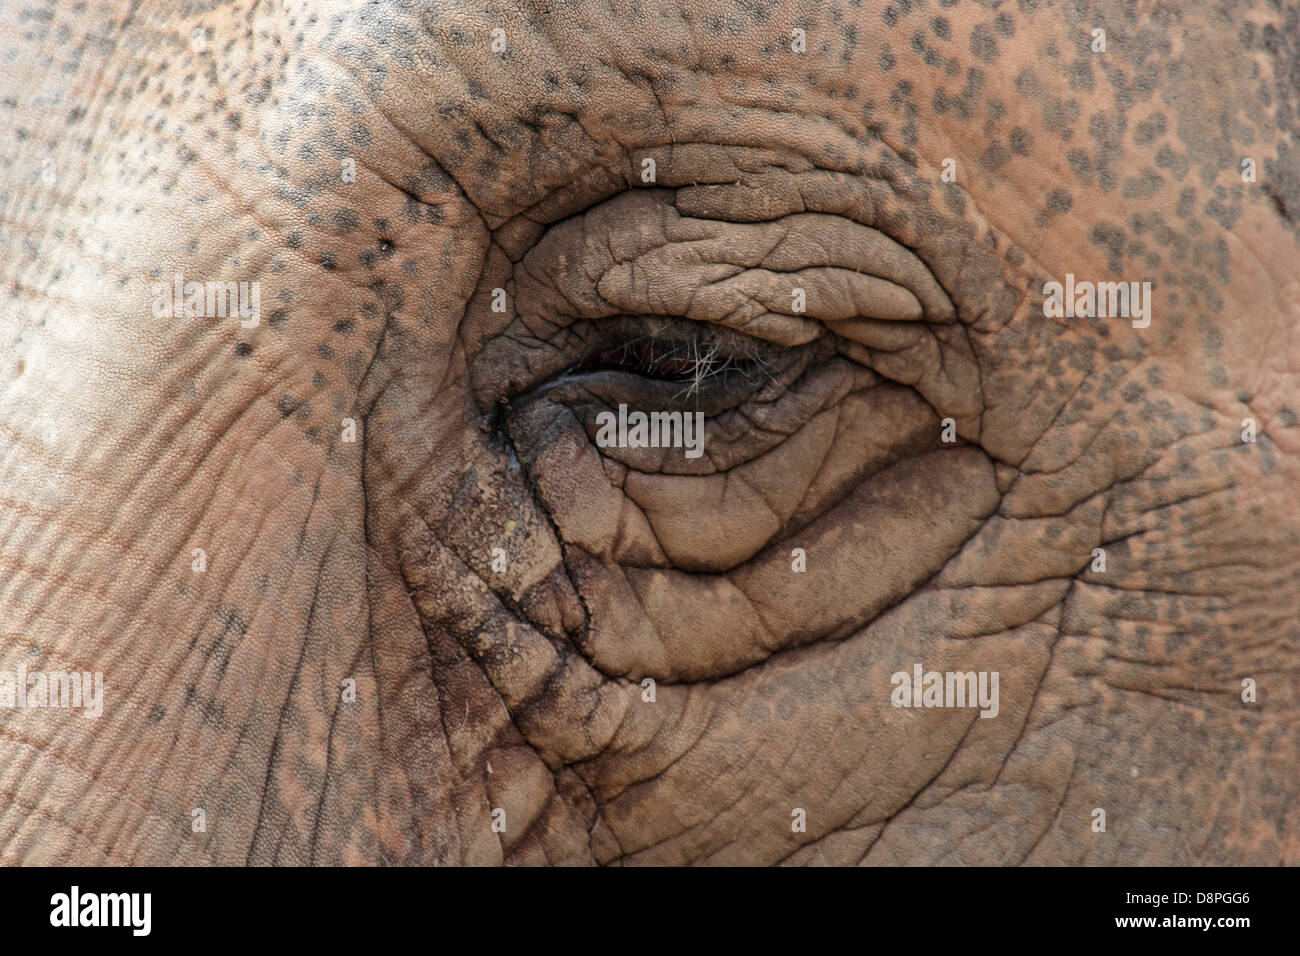 Closeup of the eye of an asiatic elephant Stock Photo